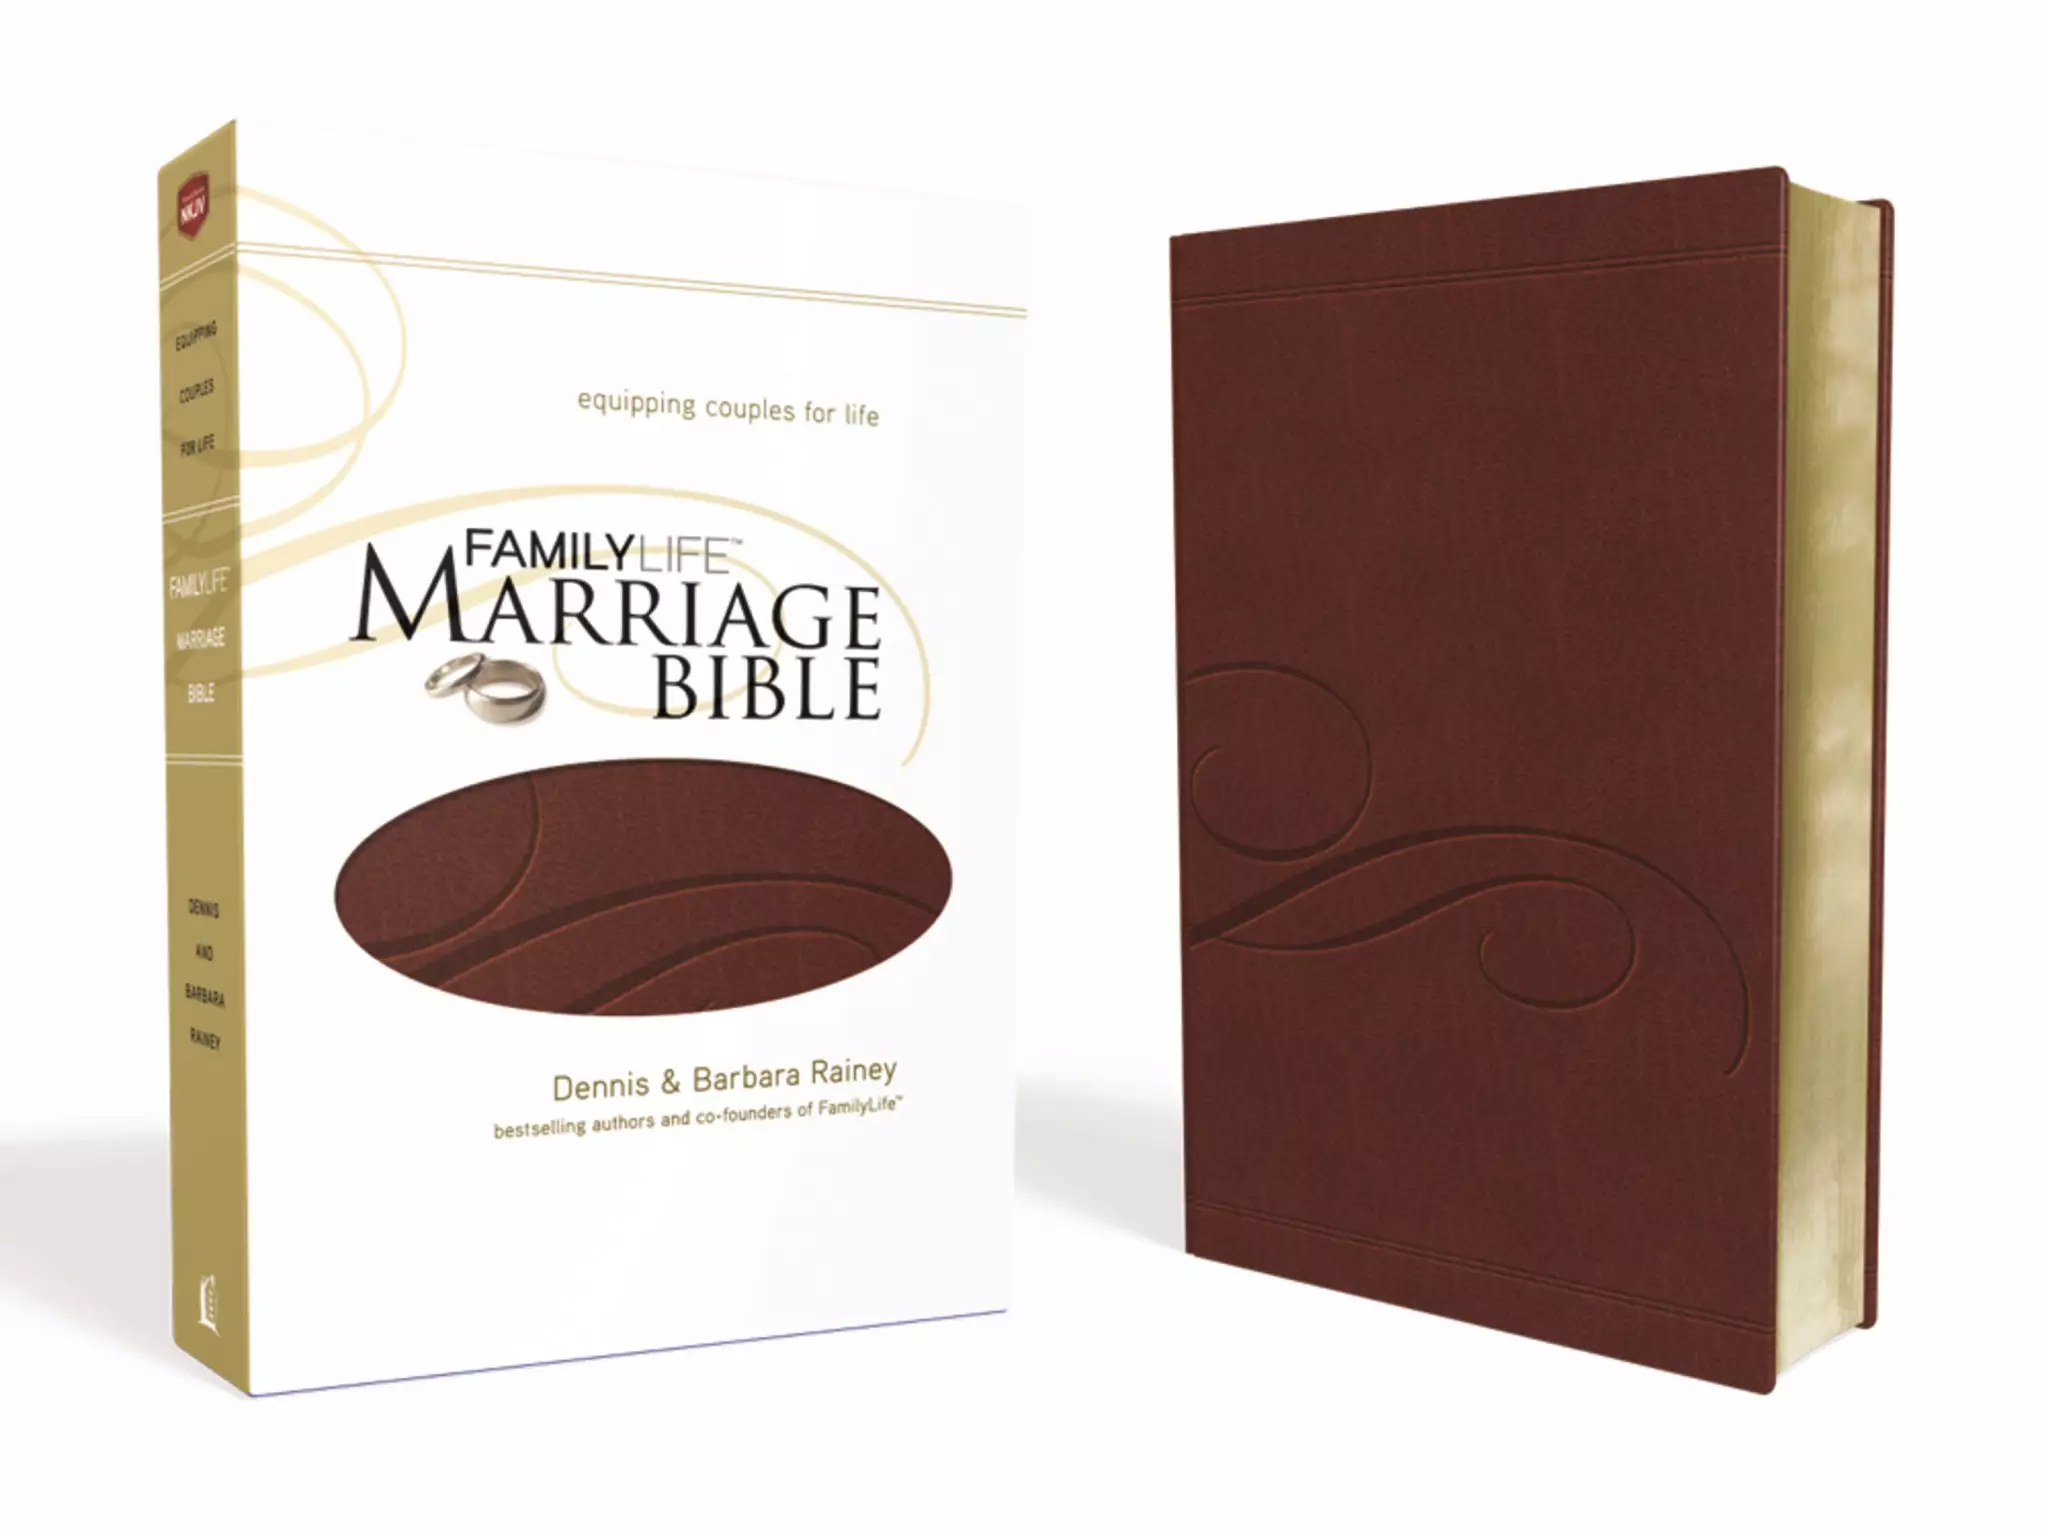 NKJV Family Life Marriage Bible: Burgundy, LeatherSoft